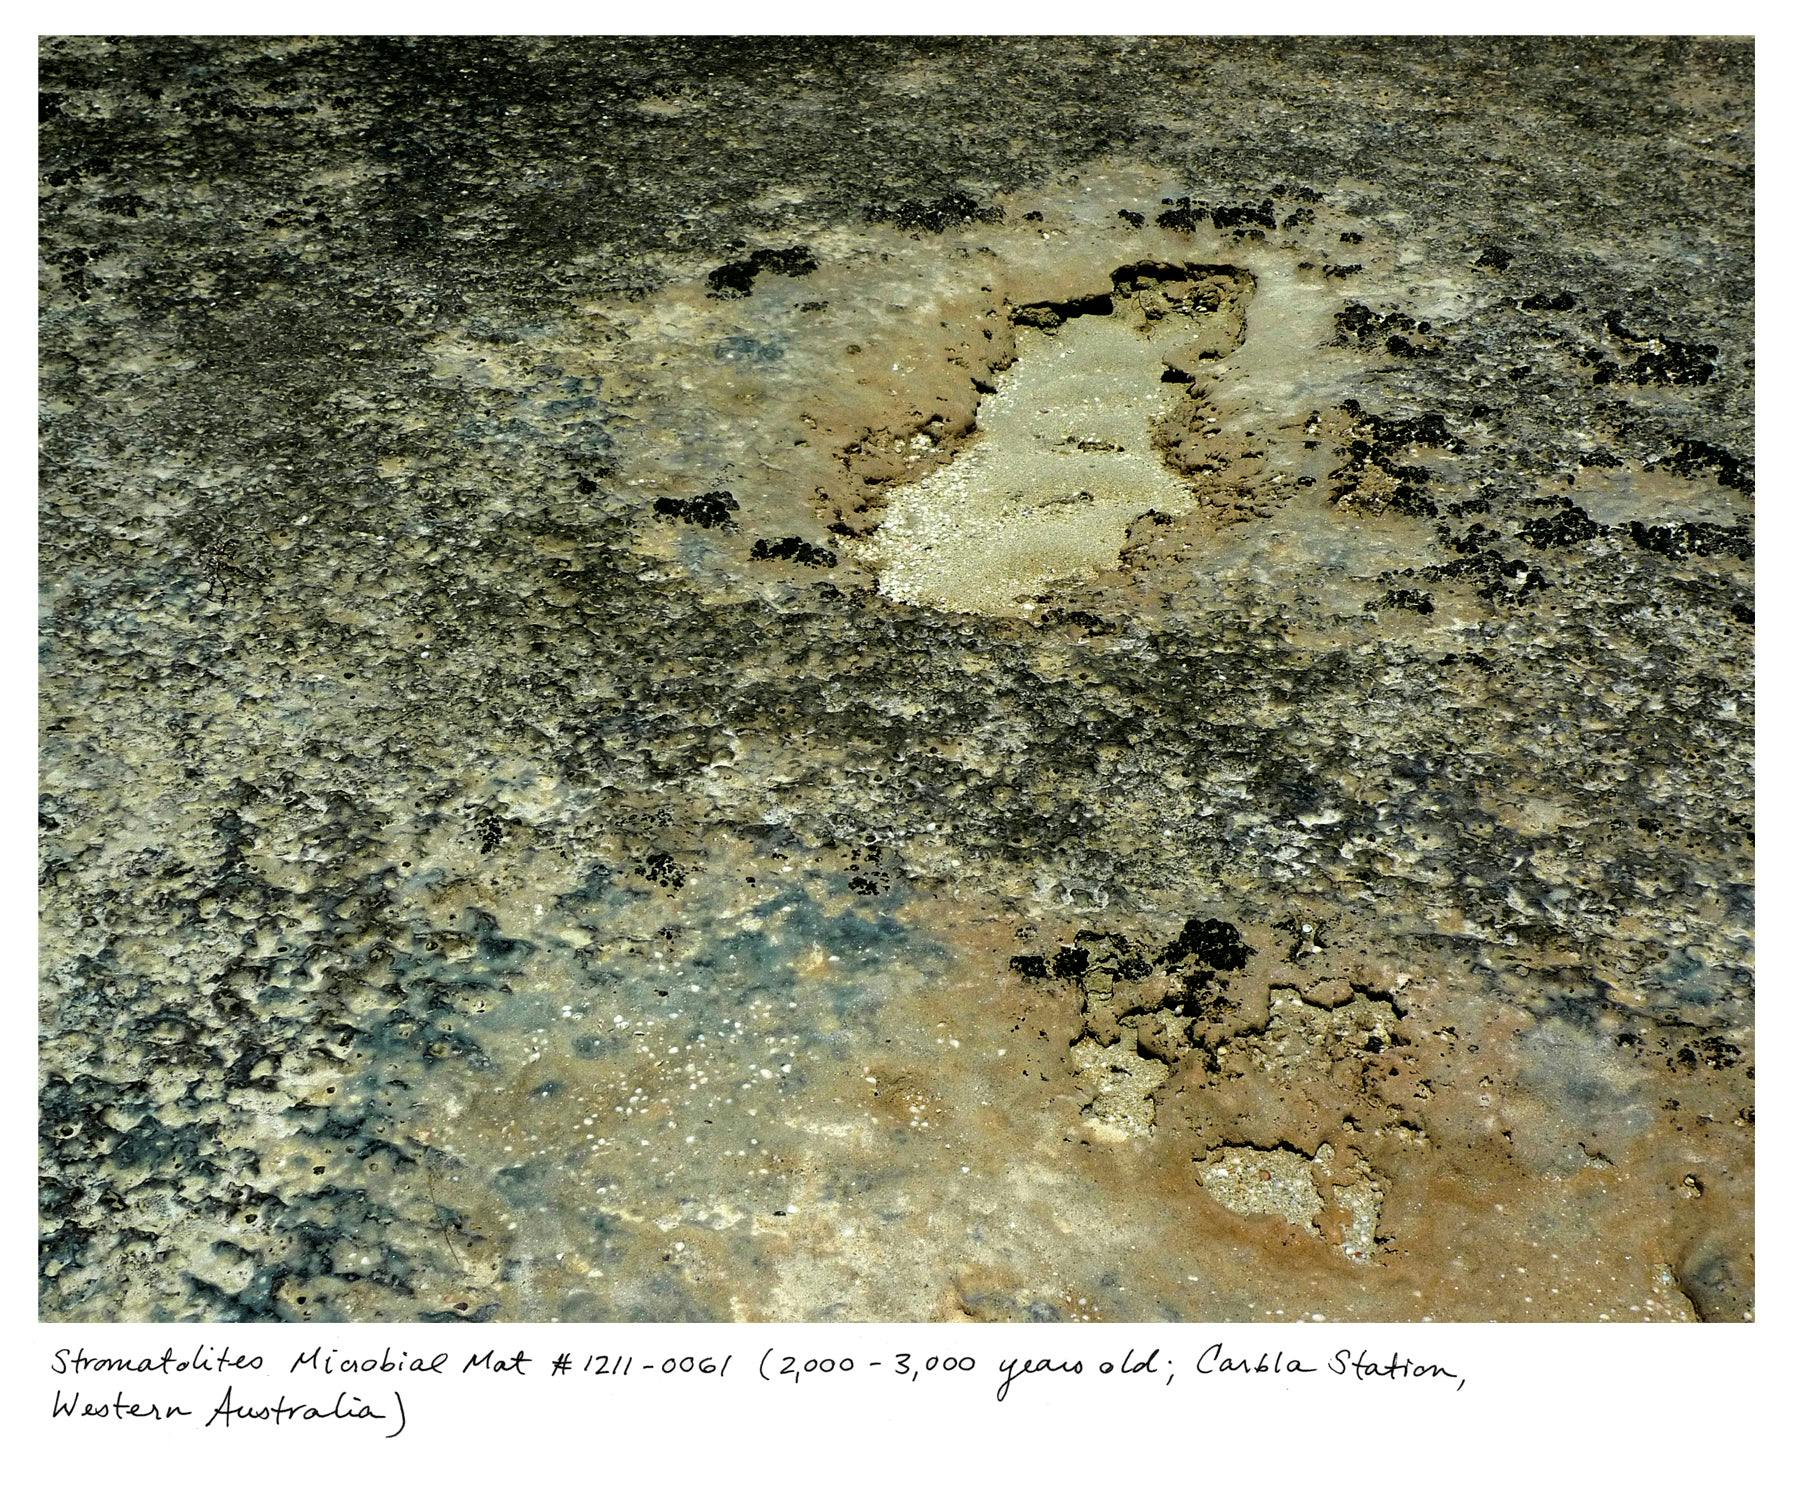 Photography by Rachel Sussman titled "Microbial Mat (2,000 - 3,000 years old; Carbla Station, Western Australia)".